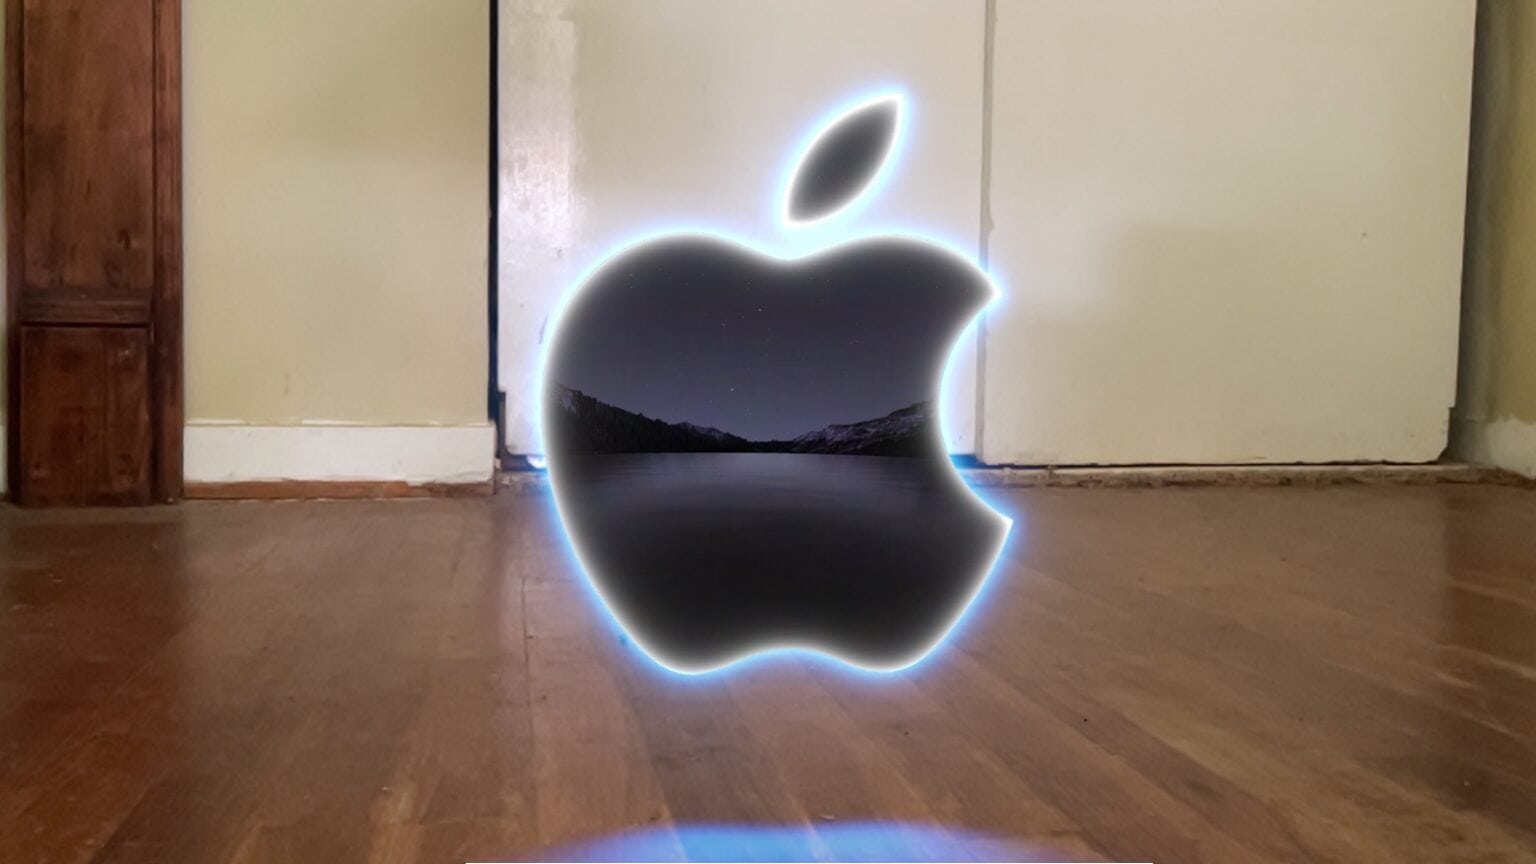 How to see the AR Easter egg in Apple’s September 14 event invite